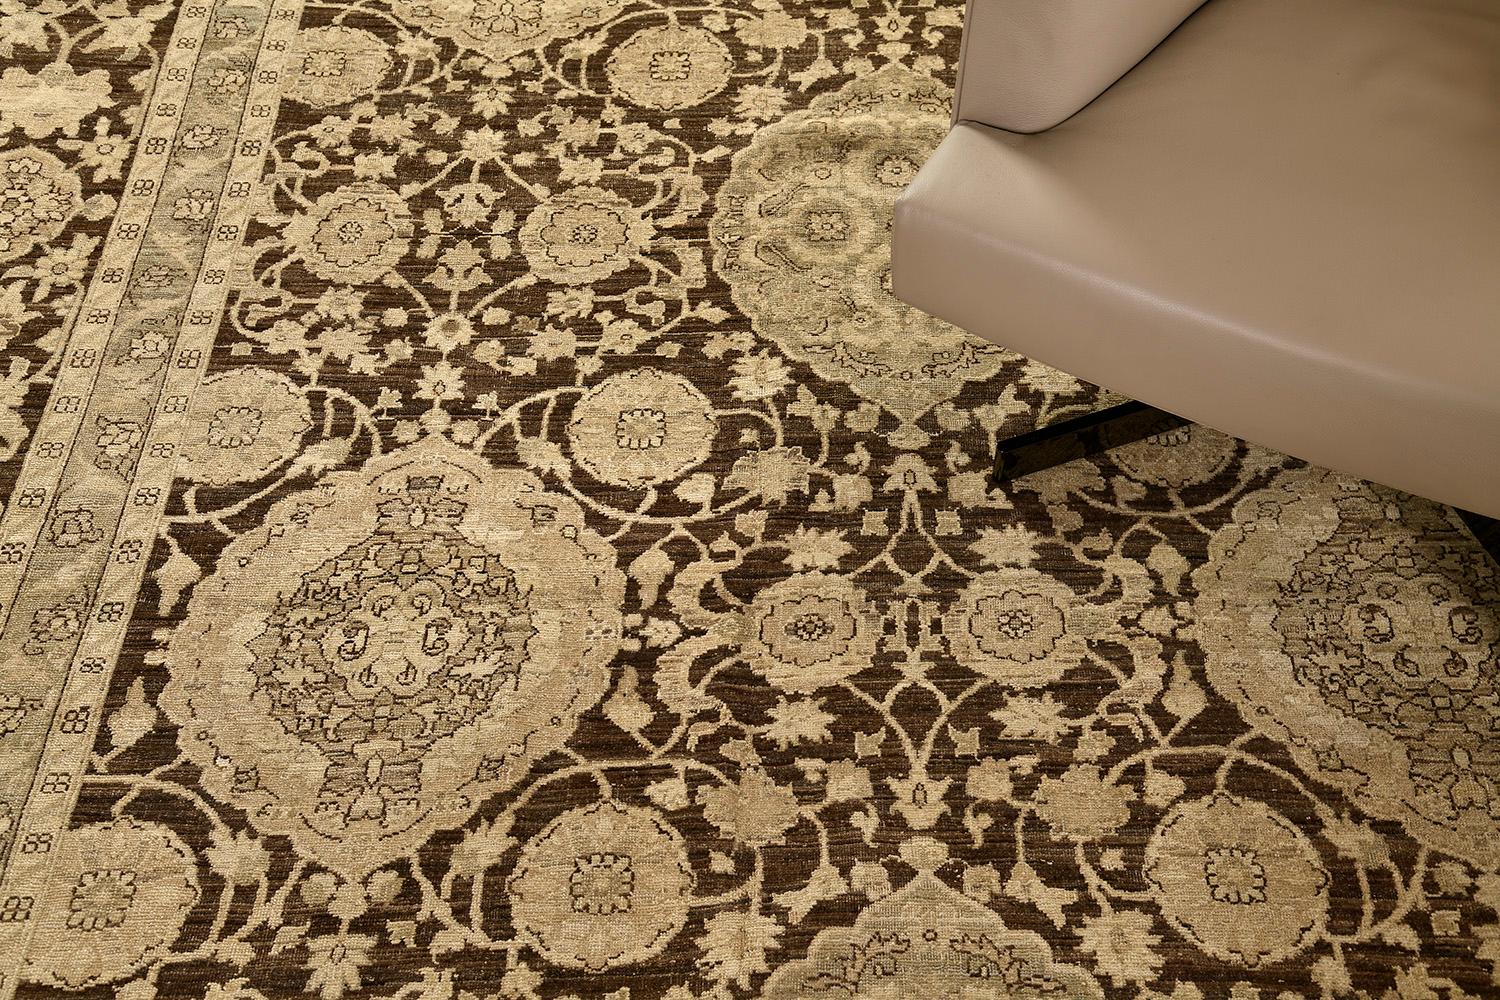 This is stylish hand-spun wool of Amritsar using brilliant patterns. Fashionable florid designs and leafy scrolls are harmoniously contributed to the surrounded symmetrical florets and vines. While the rug dominants a warm wood field, a light tan